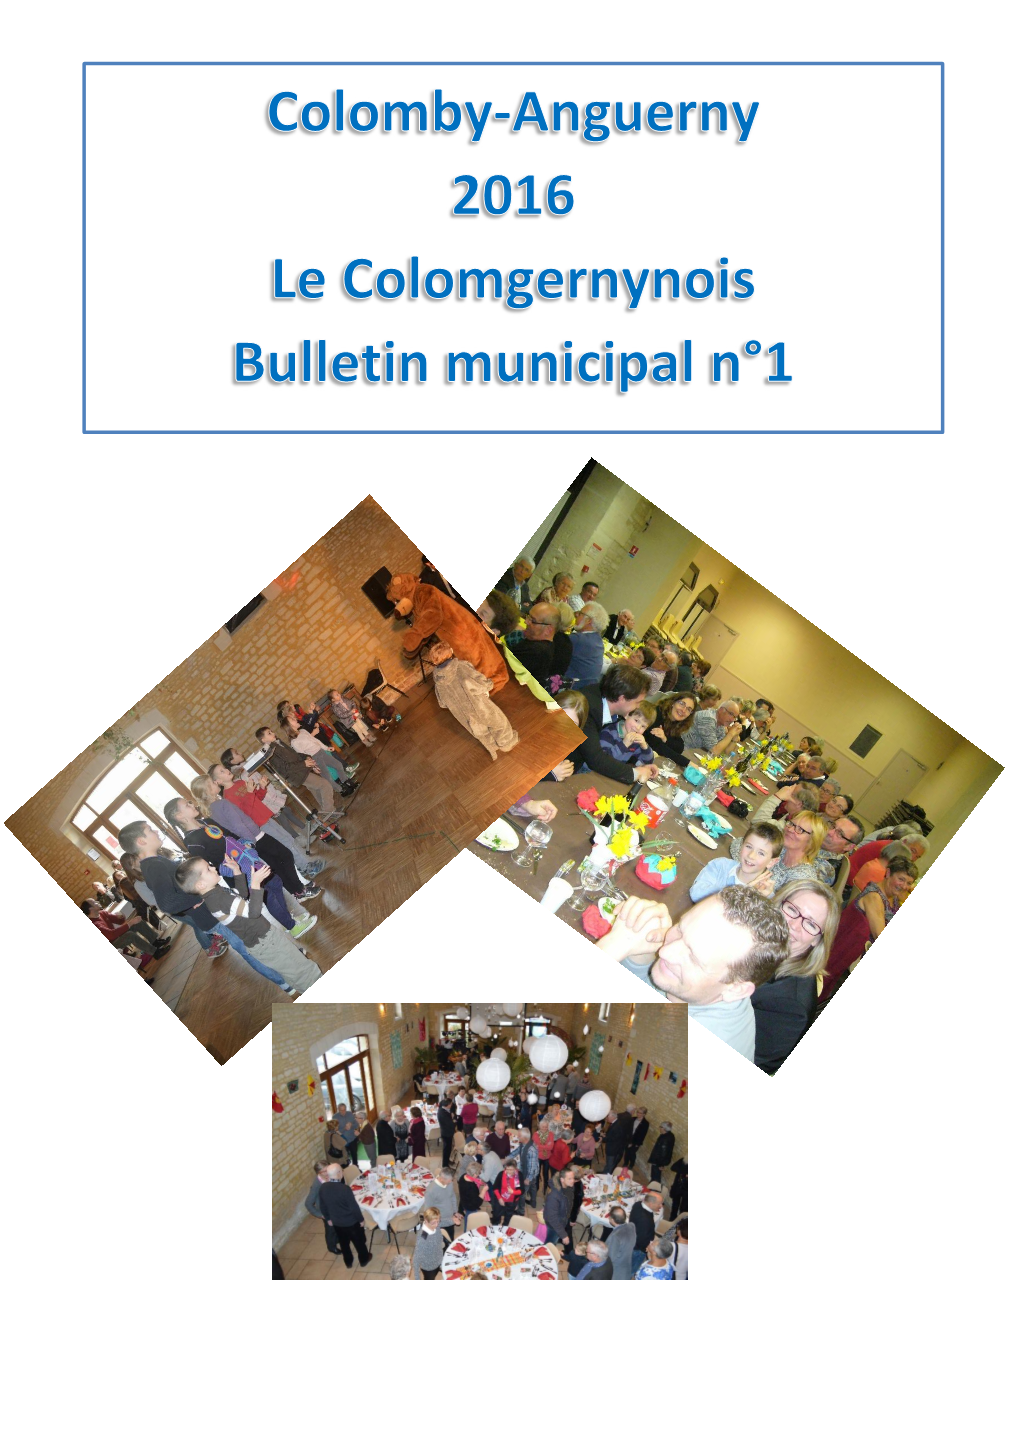 Le Colomgernynois